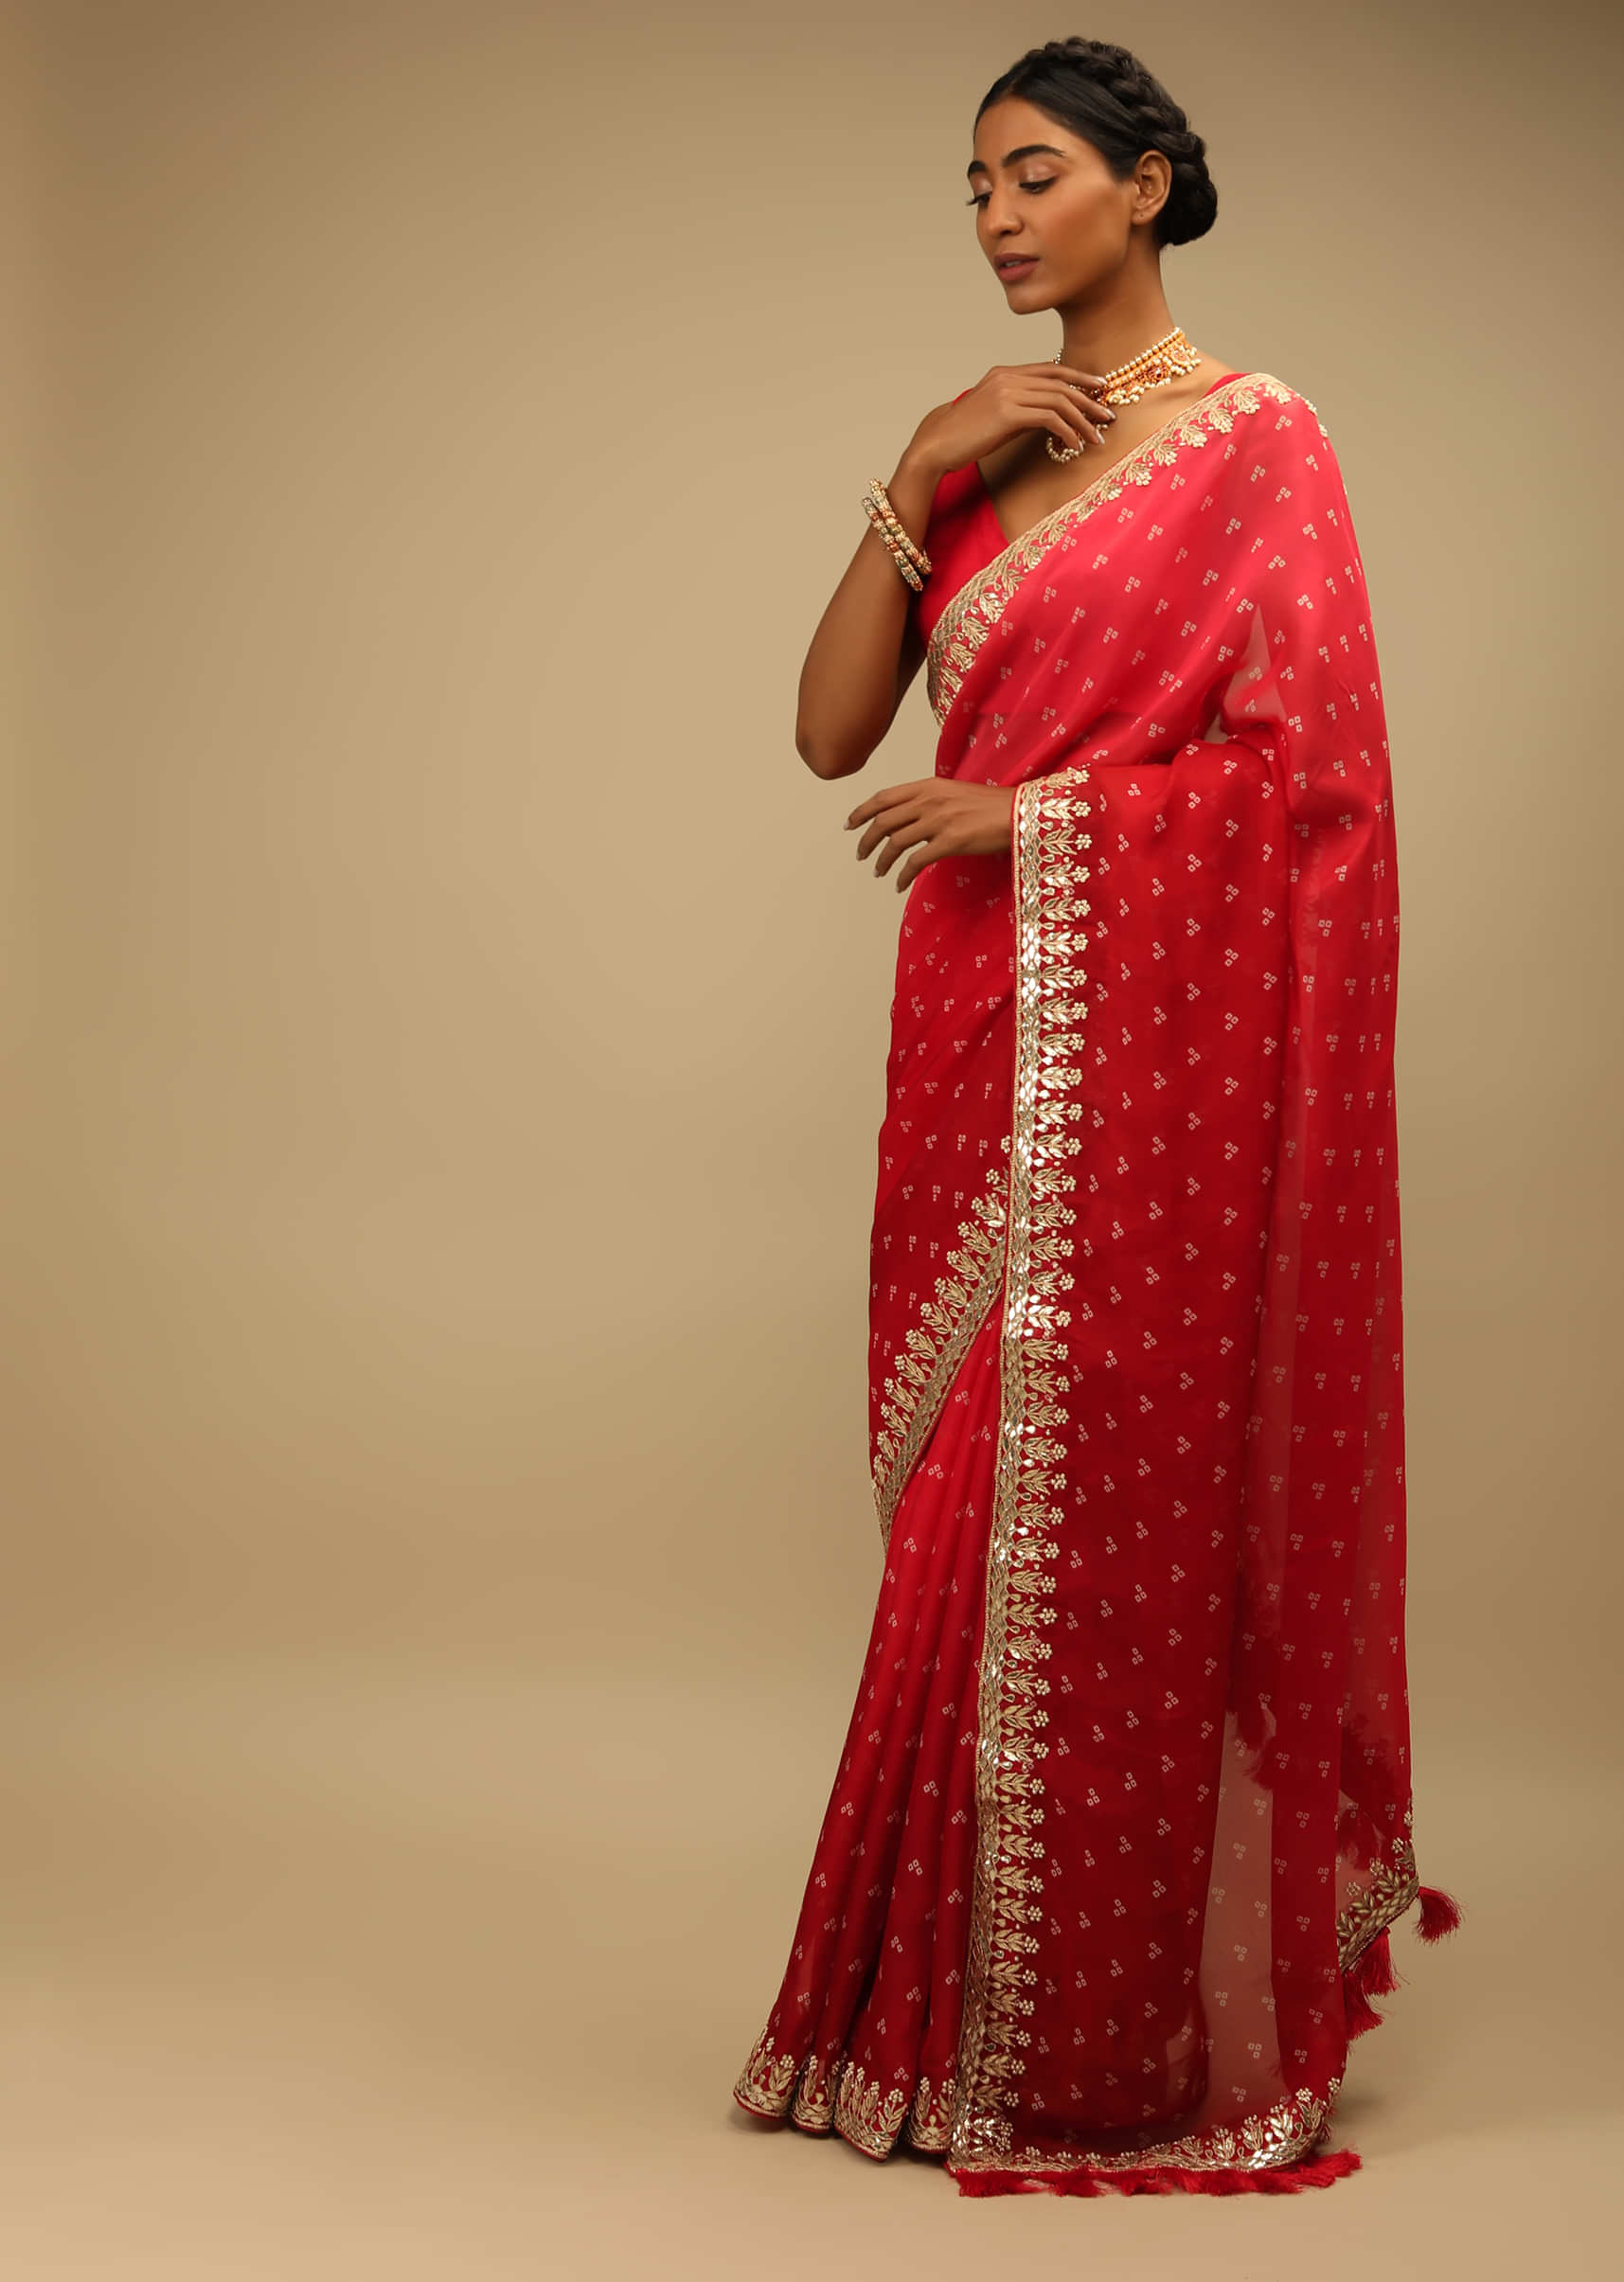 Red Ombre Saree In Organza With Bandhani Printed Geometric Buttis And Gotta Border 